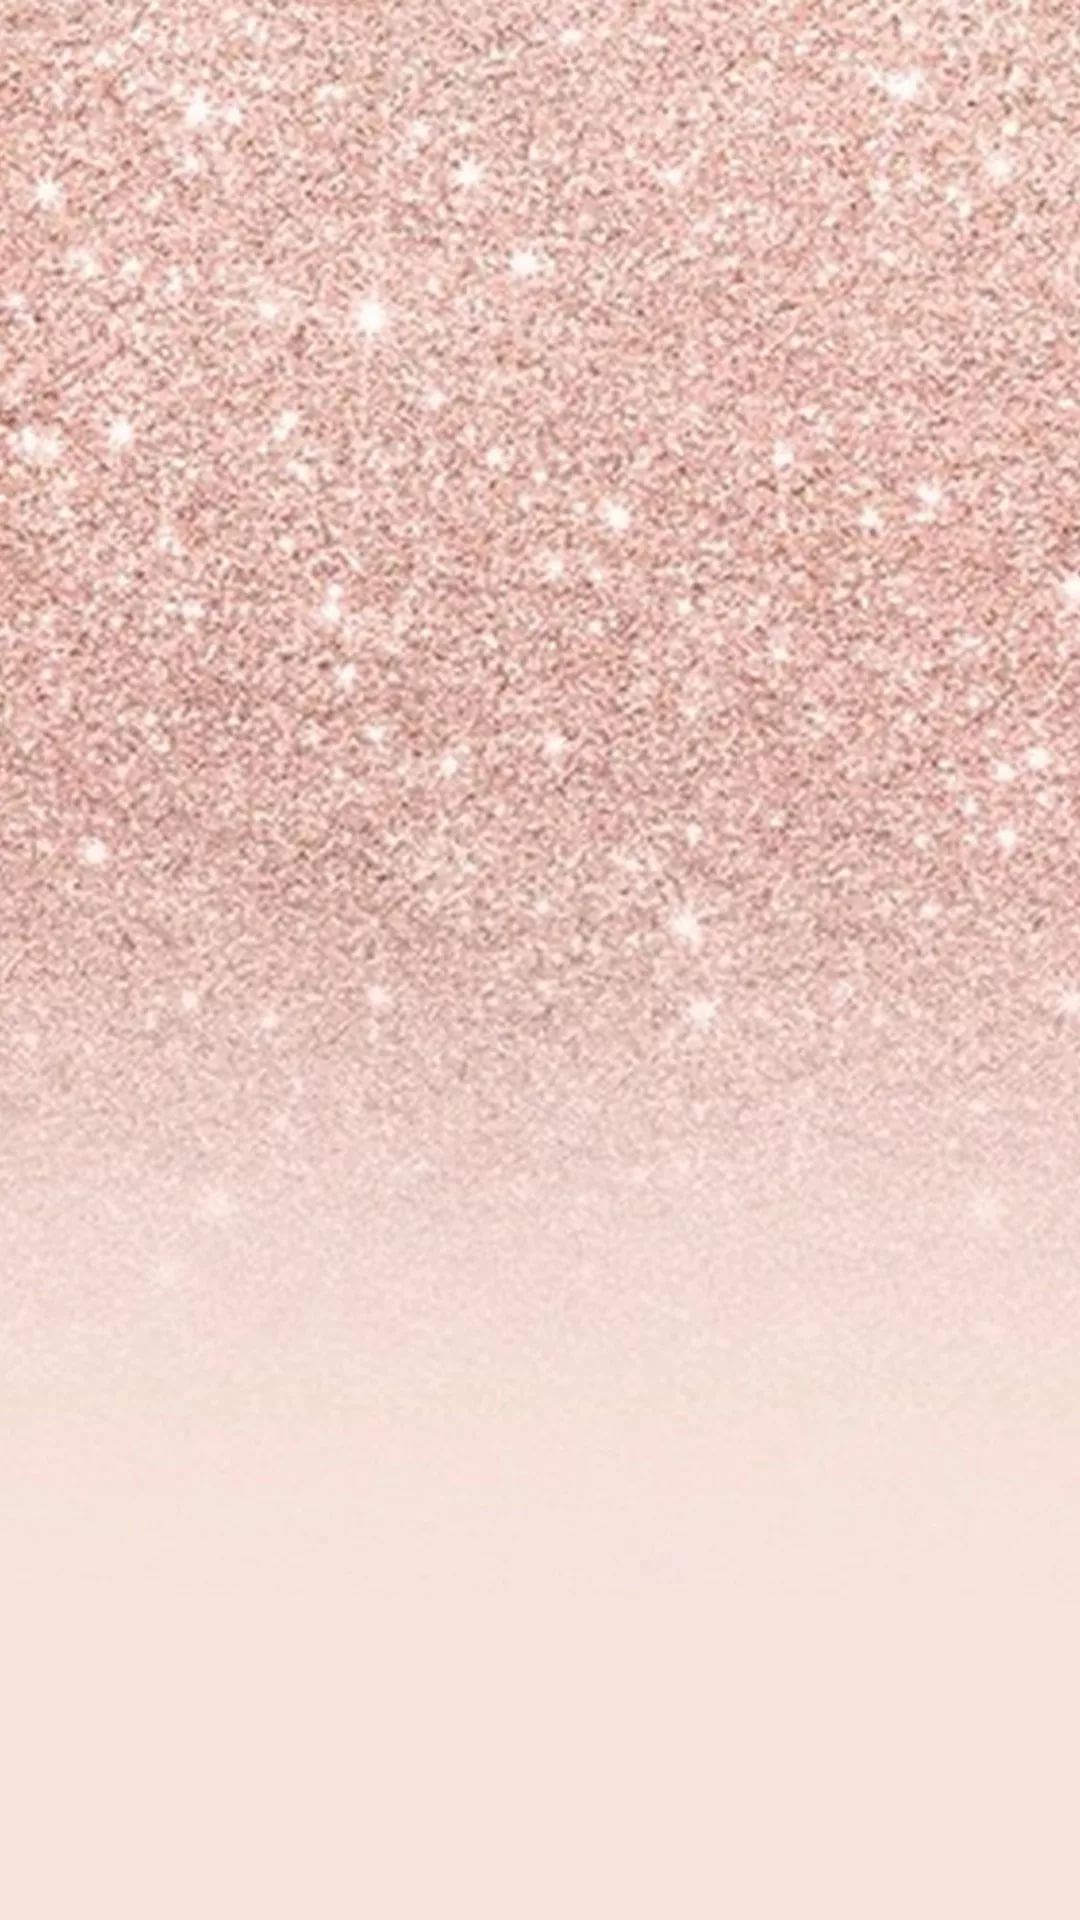 Cute Rose Gold iPhone Wallpapers on WallpaperDog